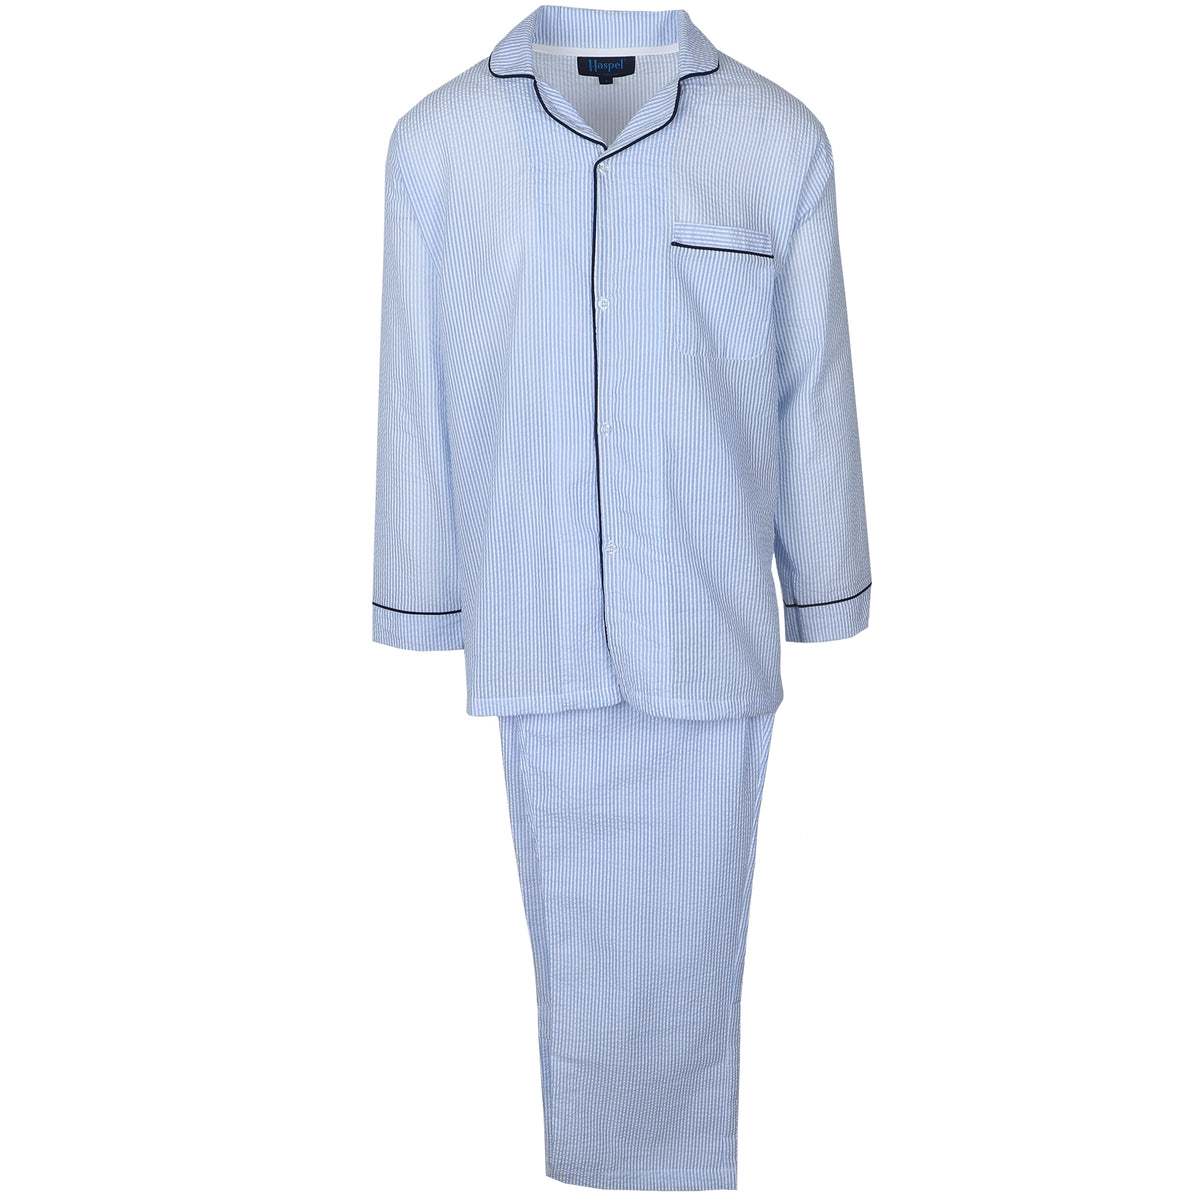 Classic, lightweight seersucker head to toe.  Our soft 100% cotton Pajamas are perfect to keep you cool all night long. Seersucker while you saw some logs!  Unlined  •  Machine Washable  •  100% Cotton Seersucker  •  Tie Waist  •  Imported